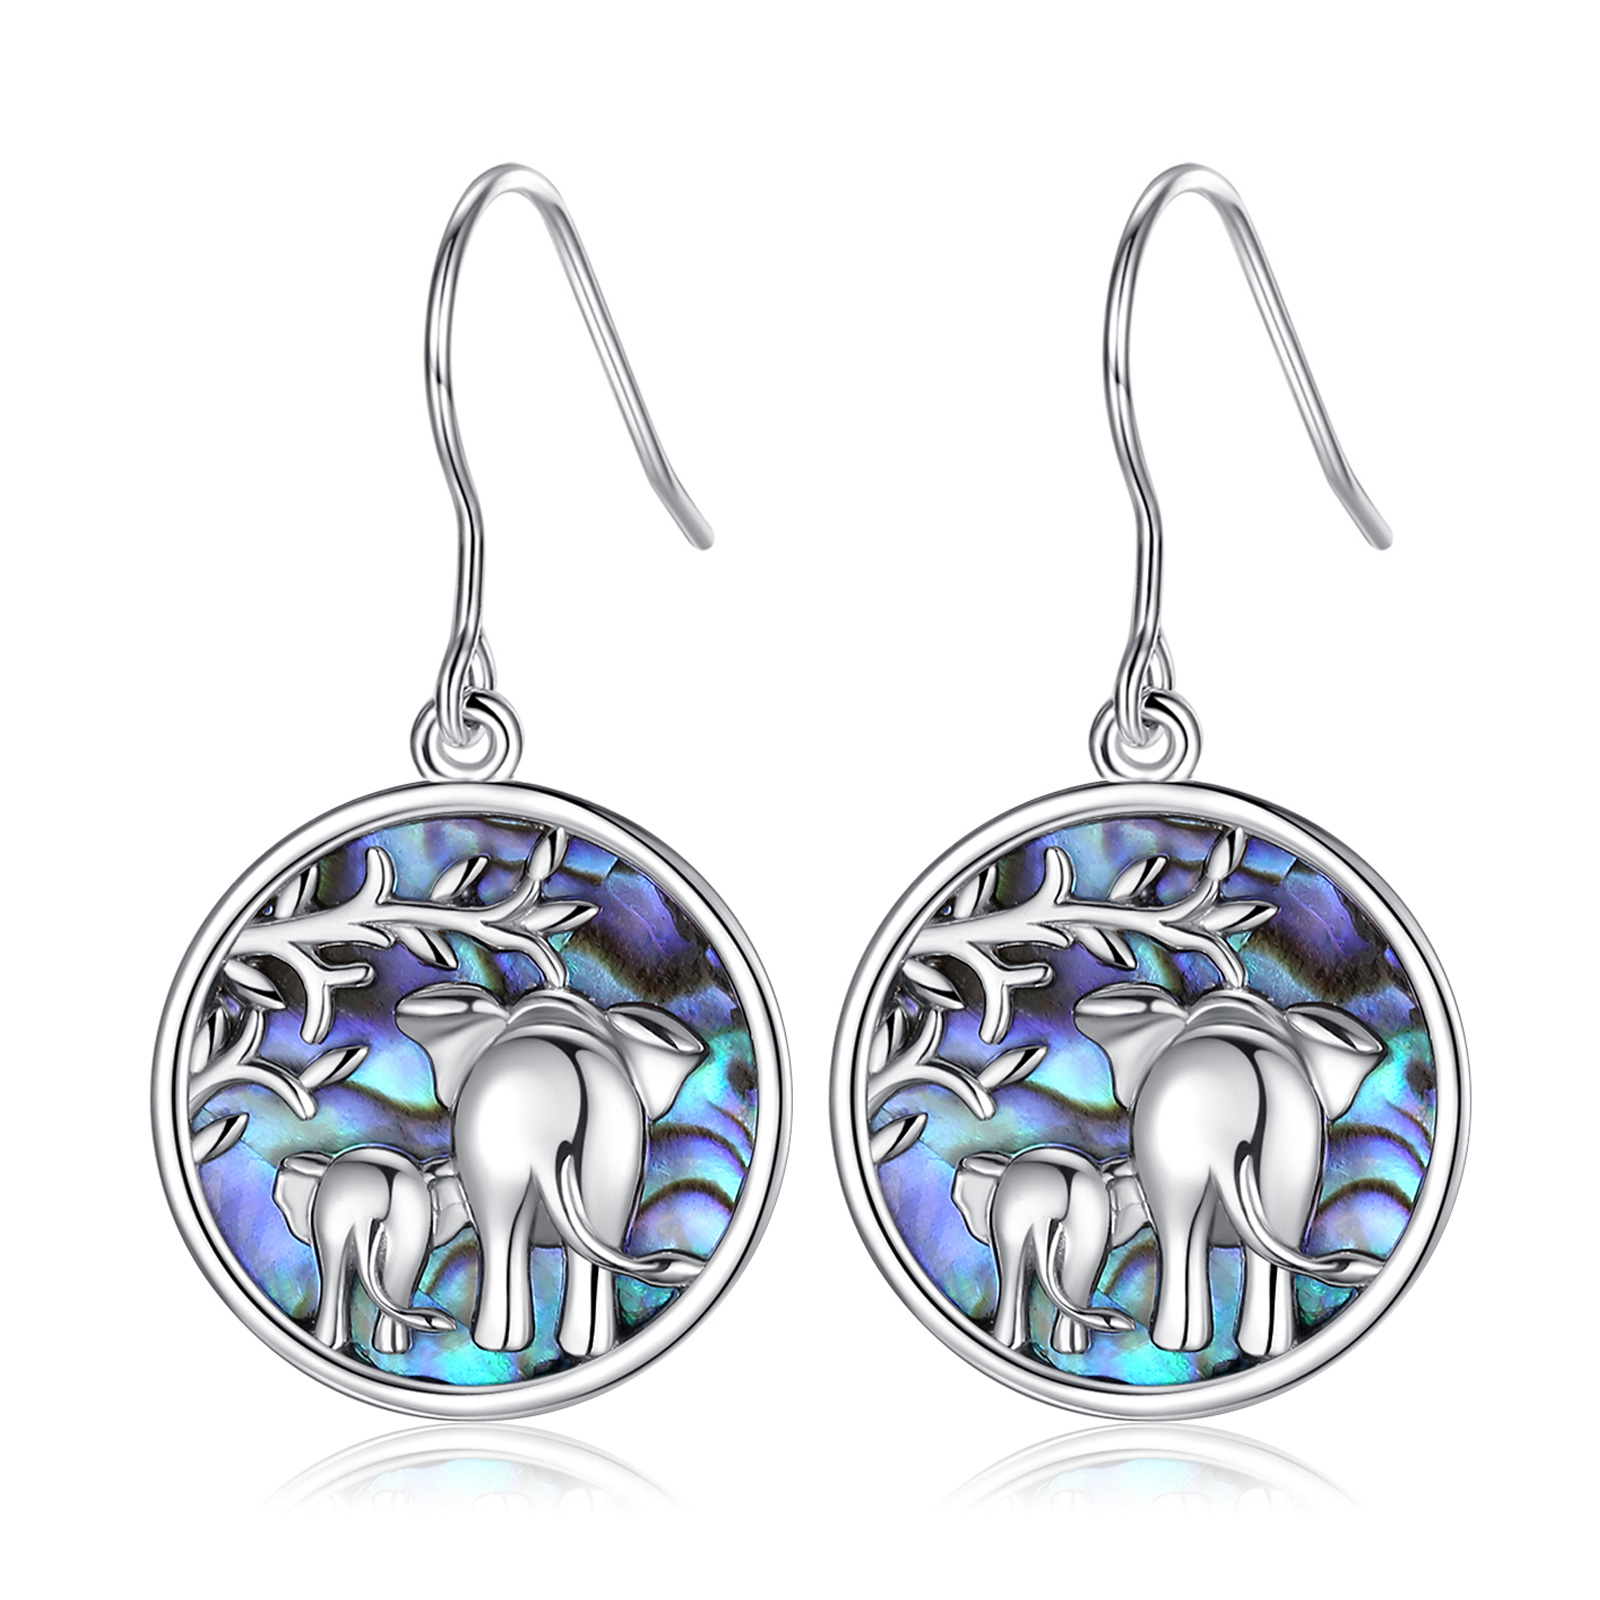 Merryshine Jewelry New Arrival Designer High Quality Abalone Shell Elephant Drop Earrings